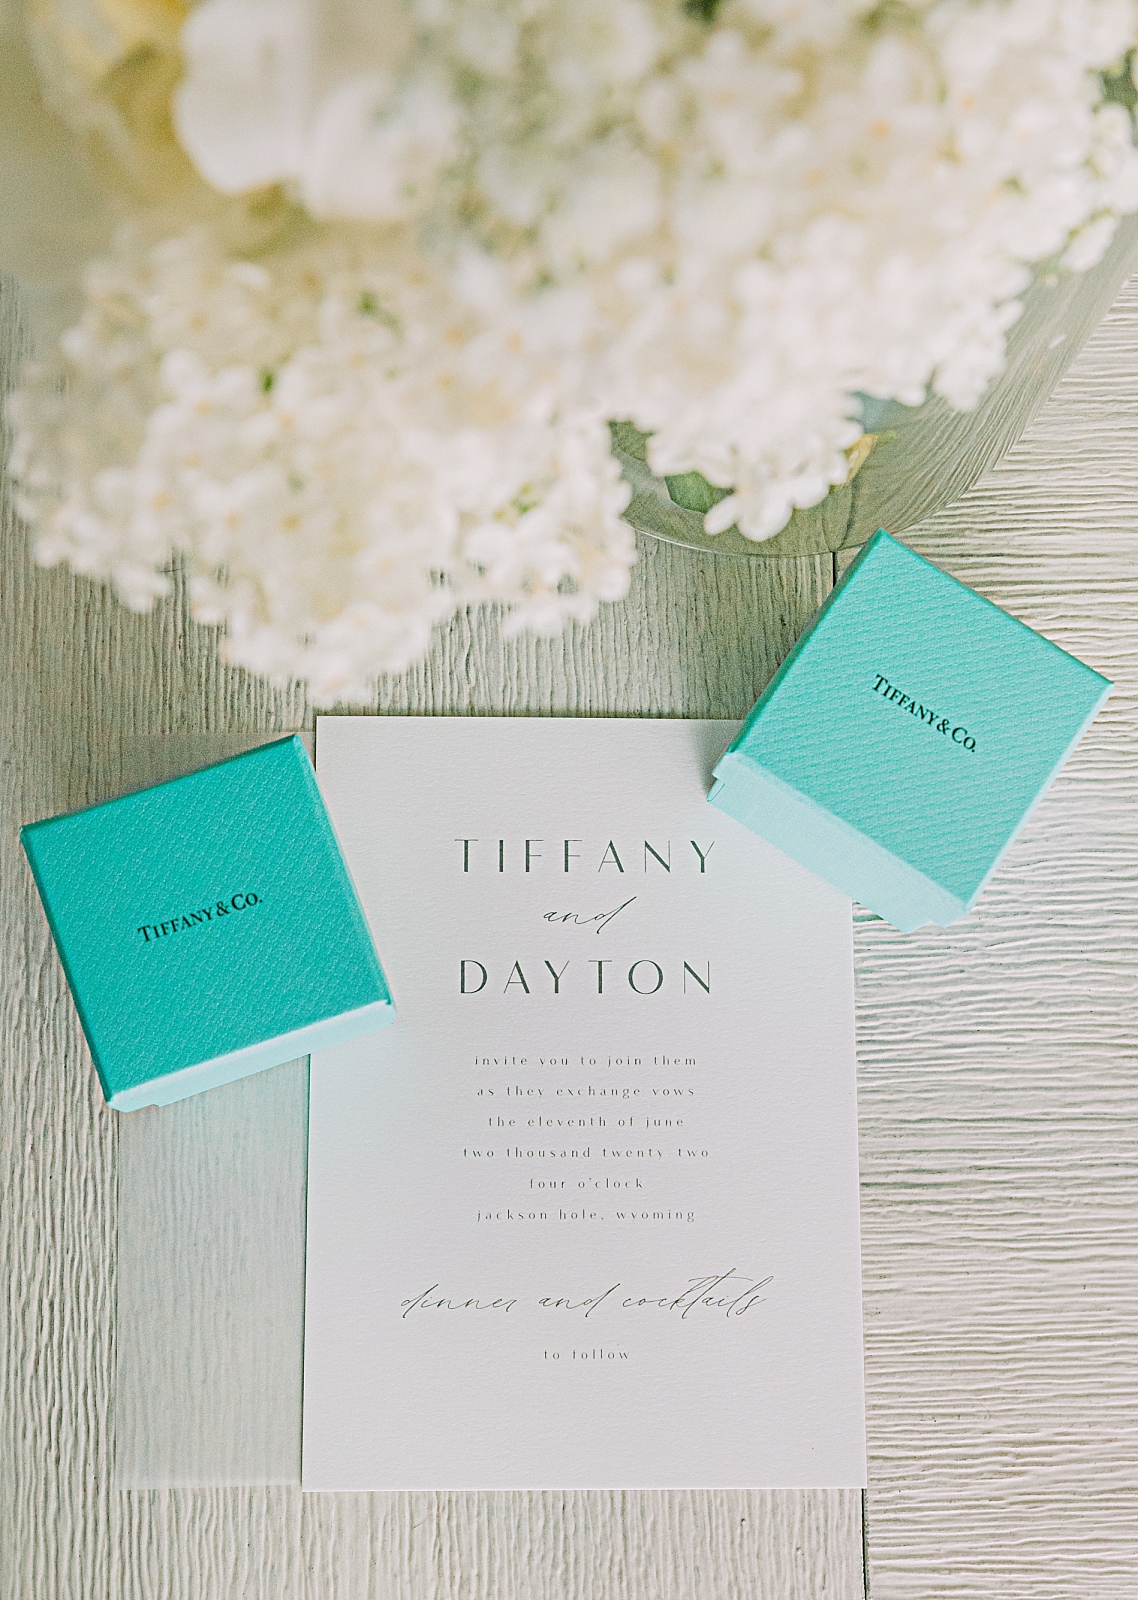 tiffany & co wedding announcement and rings classy jackson hole wedding